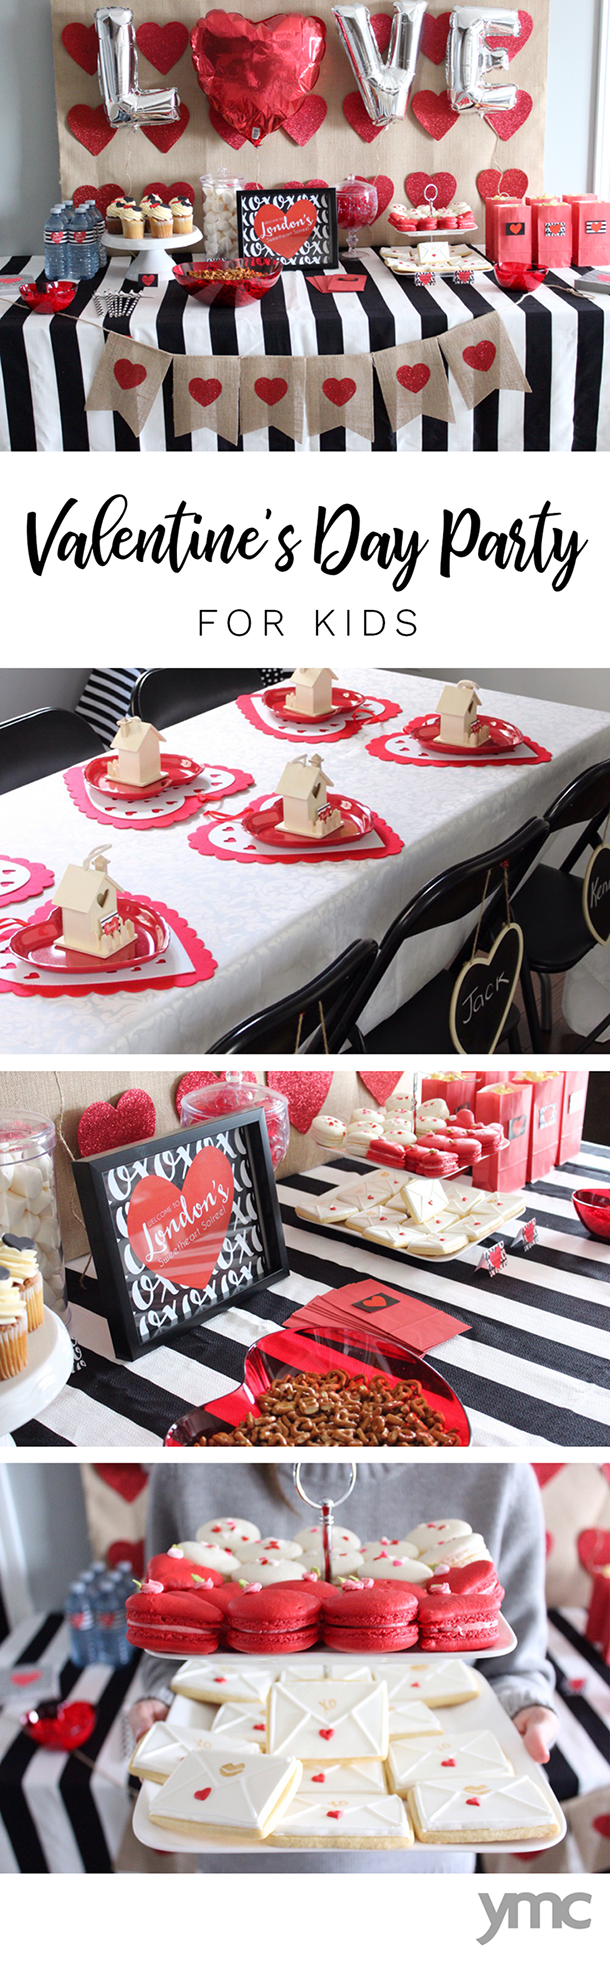 A Valentine's Day Party Idea for Kids 